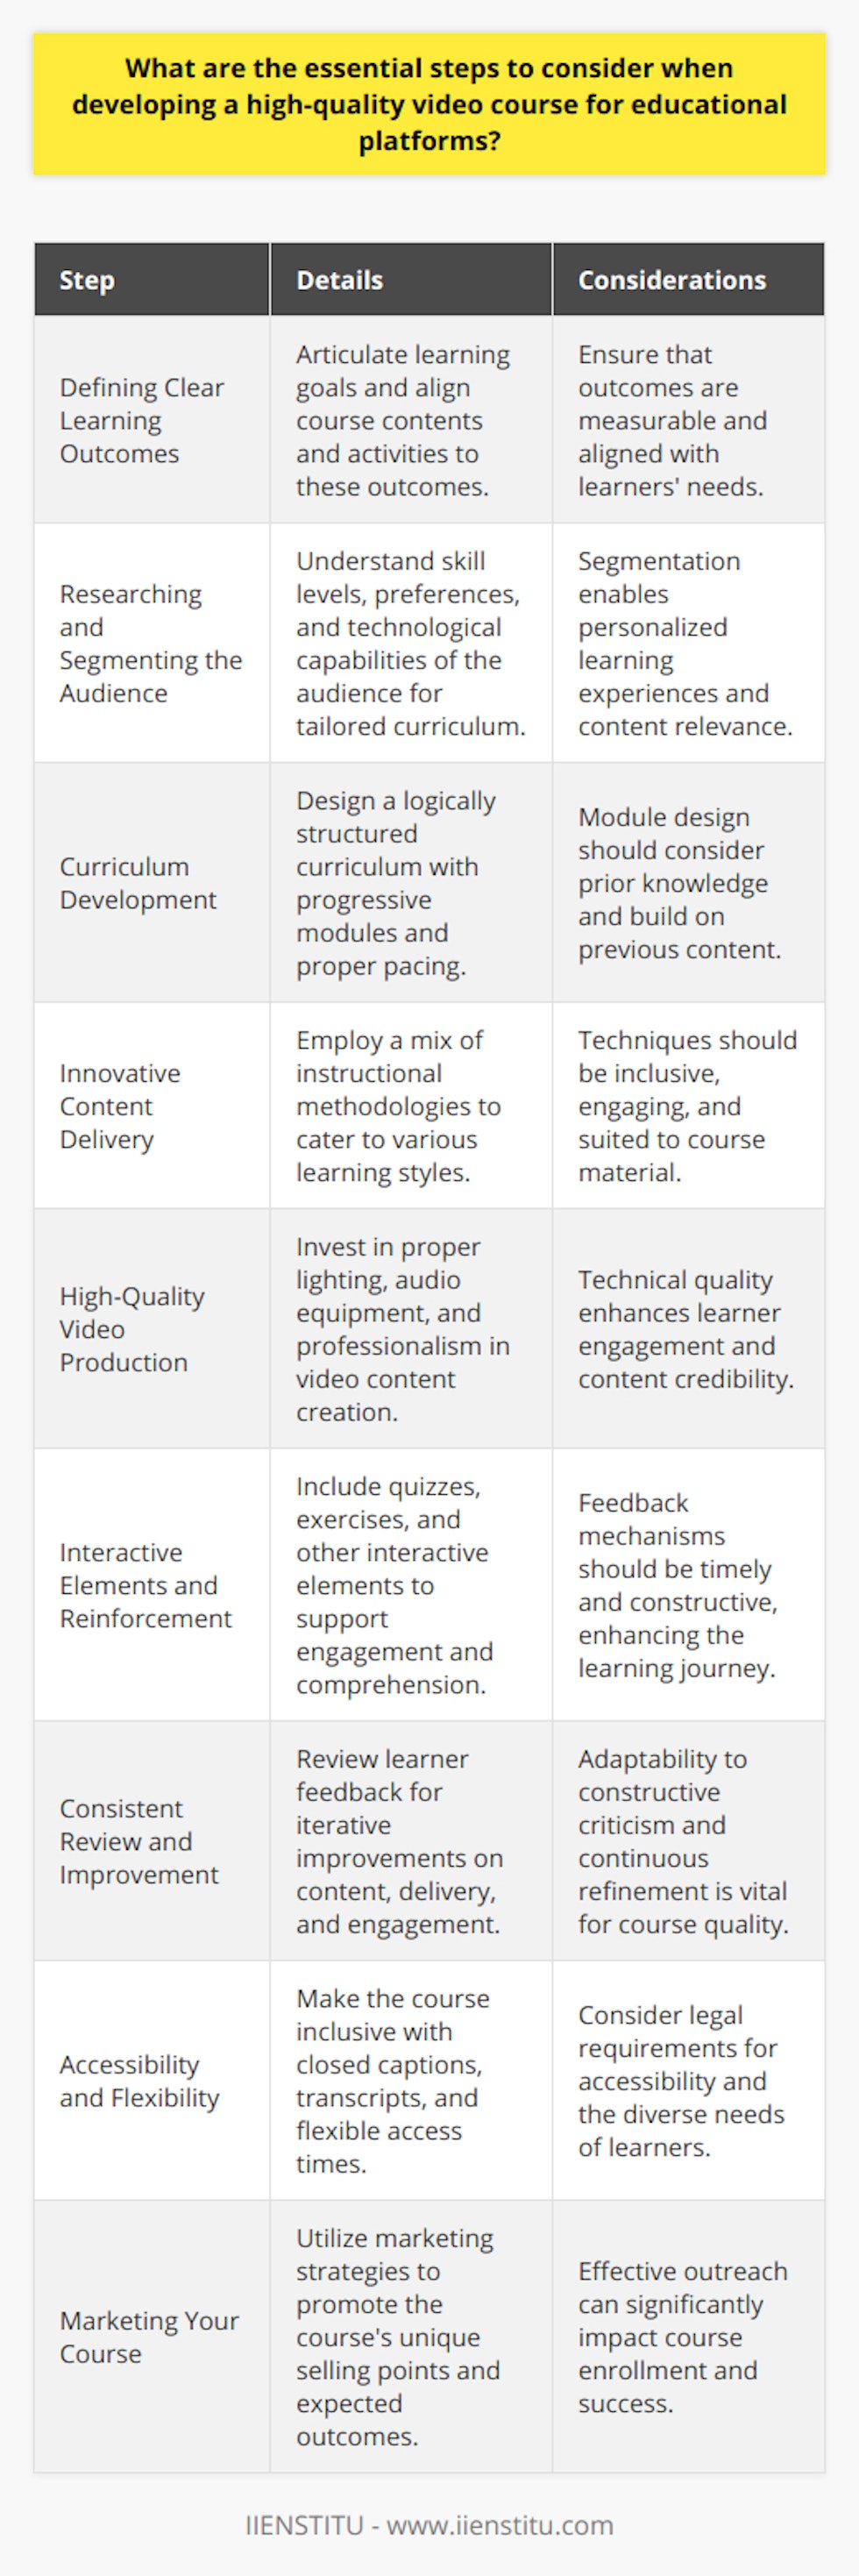 Developing a high-quality video course for educational platforms requires a multi-faceted approach that integrates pedagogy, technology, and engaging content. Here are the essential steps to consider:**Defining Clear Learning Outcomes**The process begins with articulating the learning outcomes. Clearly defined goals provide direction and purpose to the course, helping learners understand what they are expected to achieve upon completion. Align contents and activities to these outcomes to ensure your course is outcome-driven and focused on the desired results.**Researching and Segmenting the Audience**Understanding your audience is crucial. Conduct research to comprehend their skill levels, learning preferences, and technological capabilities. This knowledge allows for a tailored curriculum that resonates with your learners and matches their educational needs.**Curriculum Development**Design a curriculum that logically progresses from one topic to the next. Break down complex subjects into digestible modules, and ensure that each module builds upon the previous ones. Proper pacing is essential to avoid overwhelming the students.**Innovative Content Delivery**Choose the right blend of instructional methodologies to convey your content effectively. This might include storytelling, case studies, or interactive tutorials. Ensure that your approach addresses different learning styles, such as auditory, visual, and kinesthetic.**High-Quality Video Production**When producing your video content, pay attention to technical quality. Use proper lighting and high-quality audio equipment to make your videos professionally appealing. This attention to technical detail can enhance the viewer's experience and reinforce the emphasis on quality content.**Interactive Elements and Reinforcement**Integrate interactive elements like quizzes, exercises, and reflection moments to reinforce learning. These elements not only break up the lecture and keep learners engaged but also provide instant feedback, reinforcing their comprehension of the material.**Consistent Review and Improvement**Include a review mechanism to get feedback from your learners. This could be through mid-course surveys, end-of-course reviews, or a discussion forum. Utilize this feedback to iteratively improve the course by addressing gaps in content, delivery, or engagement.**Accessibility and Flexibility**Ensure that your video course is accessible to a diverse range of learners, including those with disabilities. Use closed captions, transcripts, and descriptive audio when appropriate. Furthermore, design your course to be as flexible as possible, allowing learners to engage with the material when and where it suits them.**Marketing Your Course**Developing a course is only half the battle; you need to attract learners too. Employ effective marketing strategies, highlighting the unique selling points of your course and the outcomes they can expect.IIENSTITU, as a recognized brand, can play a significant role in hosting and distributing your high-quality video course. By focusing on these essential steps and collaborating with respected platforms, educators can create influential and impactful online learning experiences. The key is to prioritize the learner's experience and deliver content that is not only informative but also aesthetically pleasing and engaging.